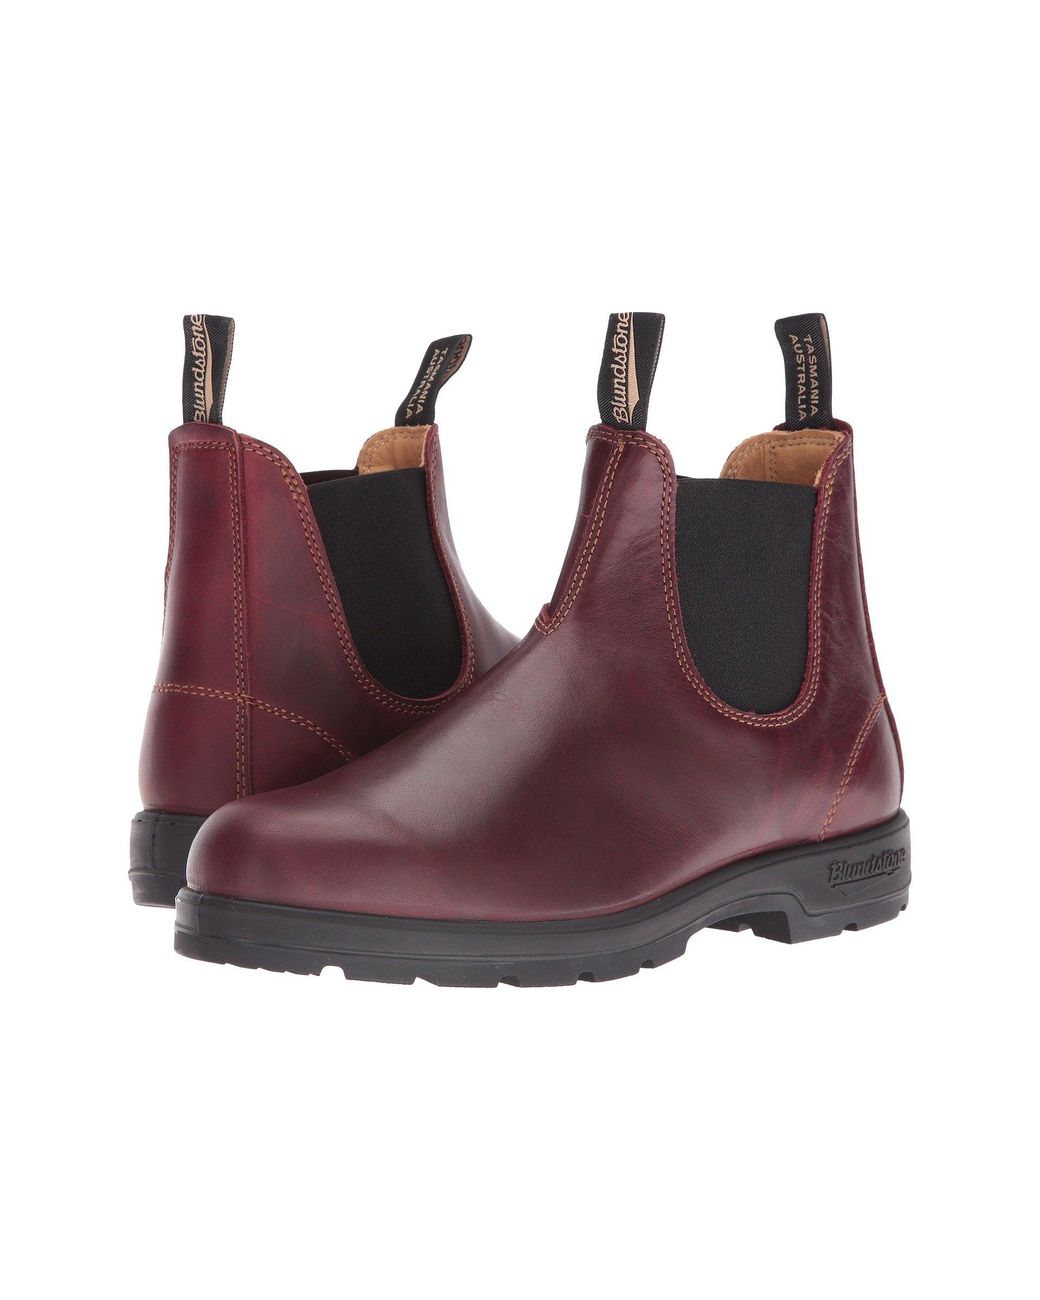 Blundstone Leather Bl1440 Dress Chelsea Boot | Lyst